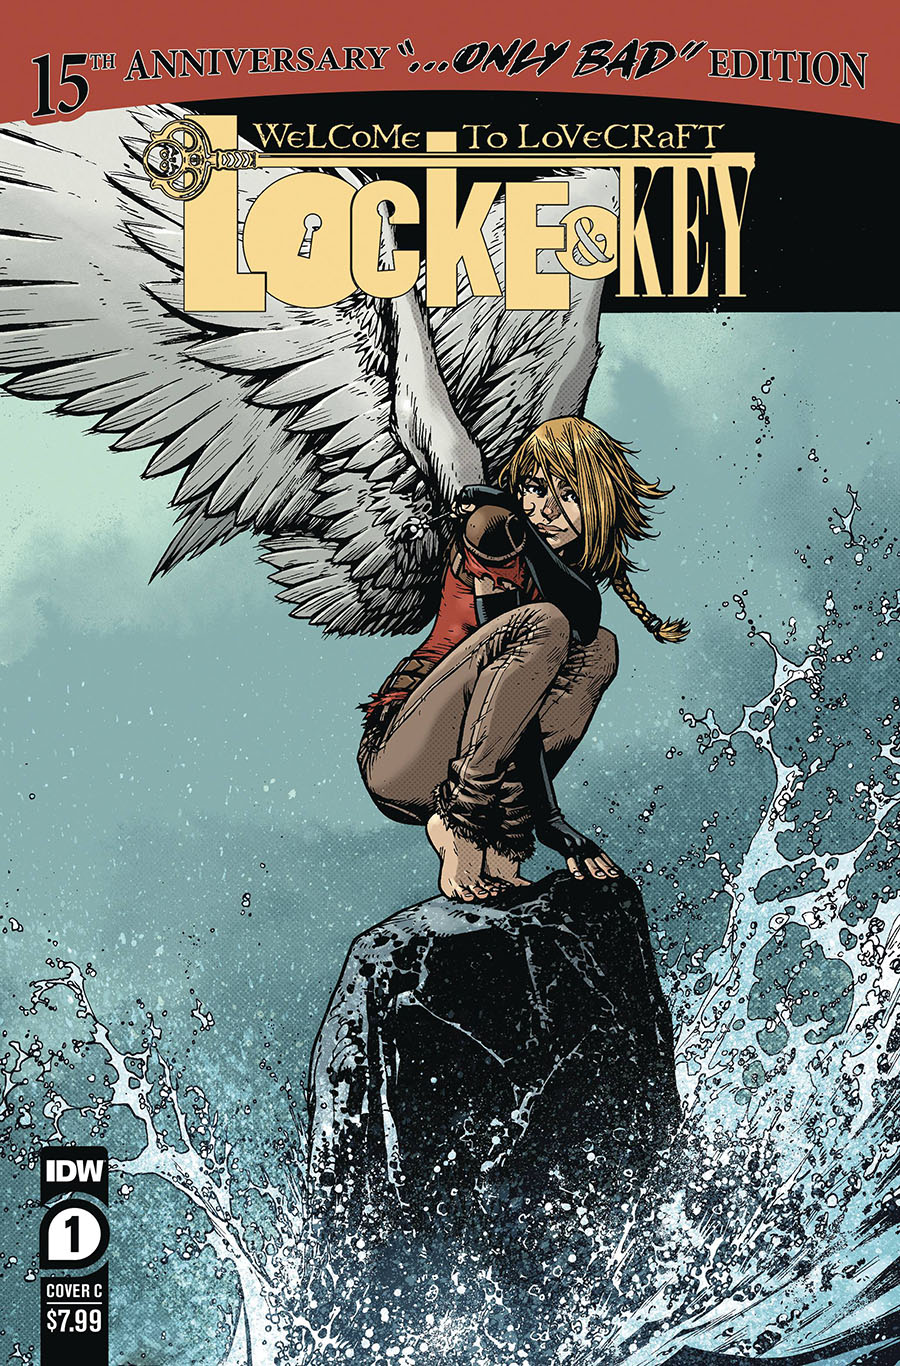 Locke & Key Welcome To Lovecraft Anniversary Edition #1 (One Shot) Cover C Variant Zach Howard Cover